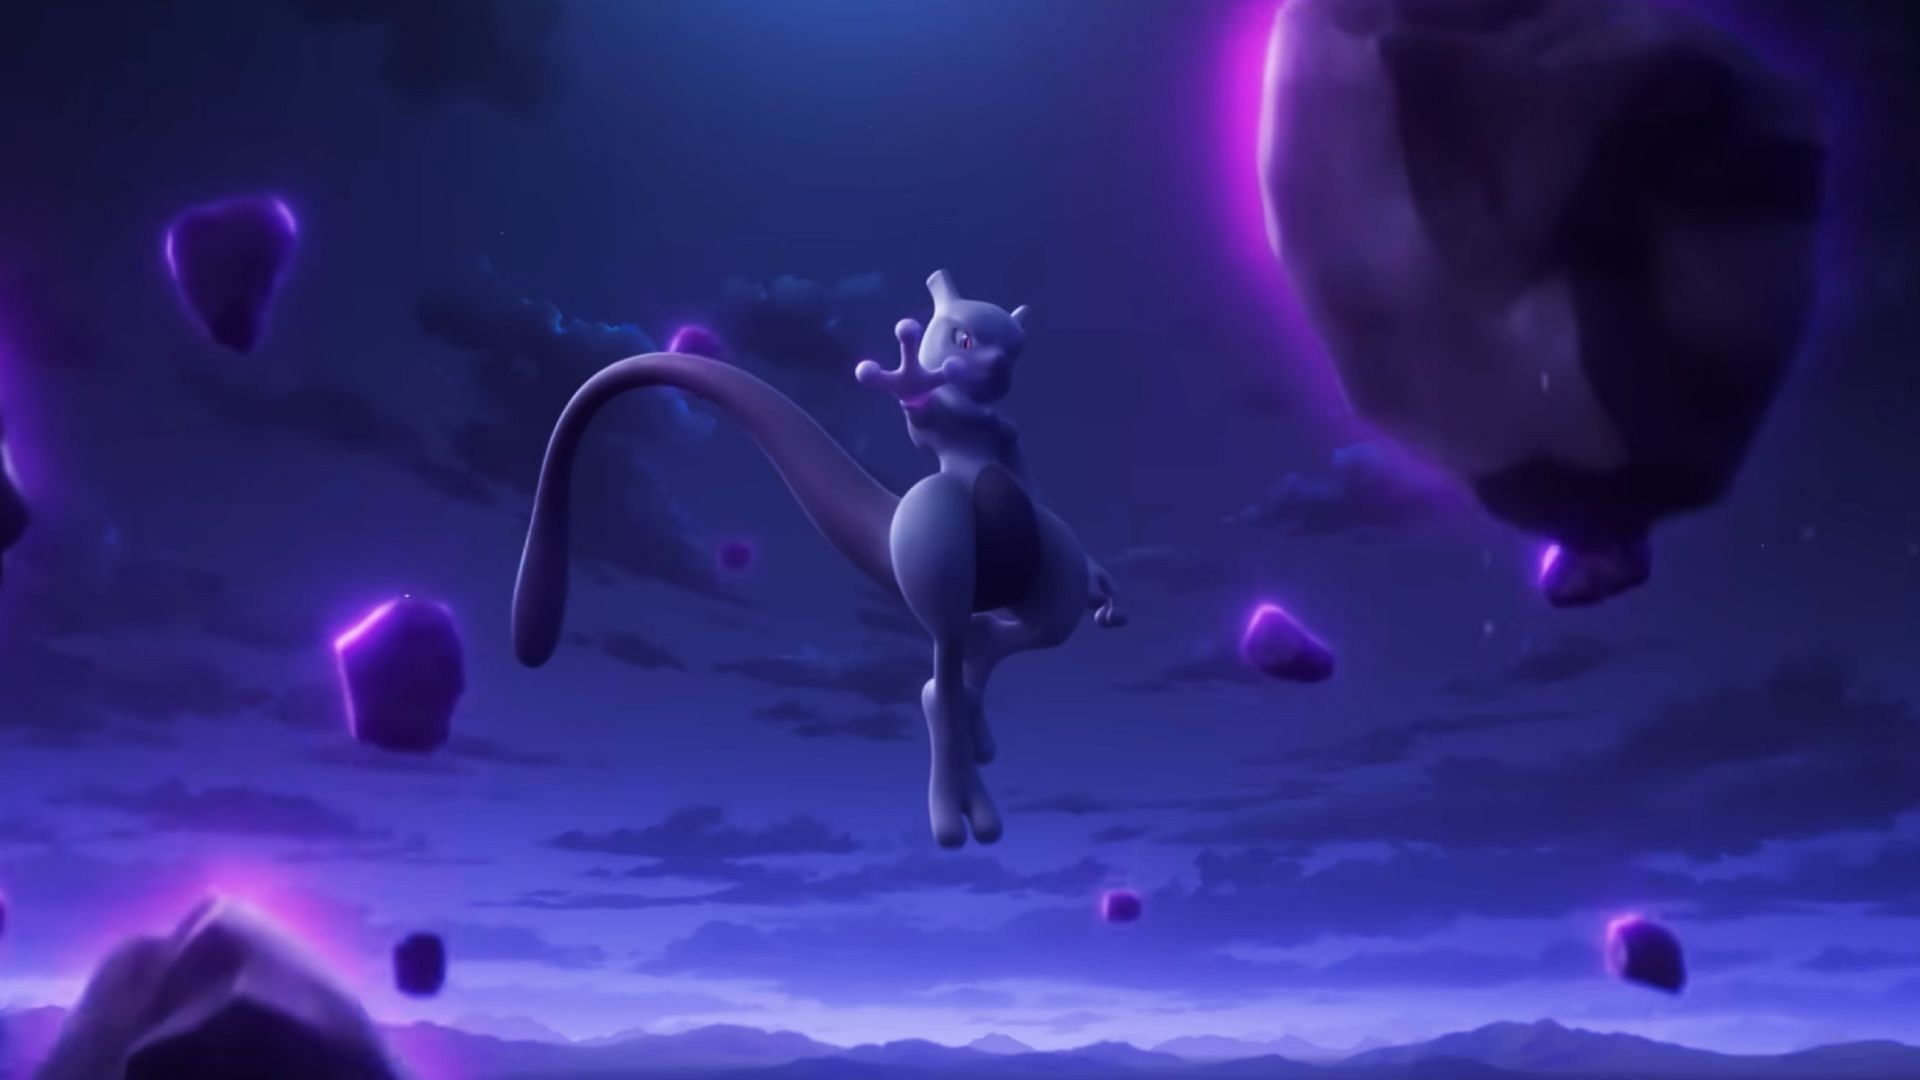 All Mighty Mewtwo 7-star Tera Raid counters in Pokemon Scarlet and Violet